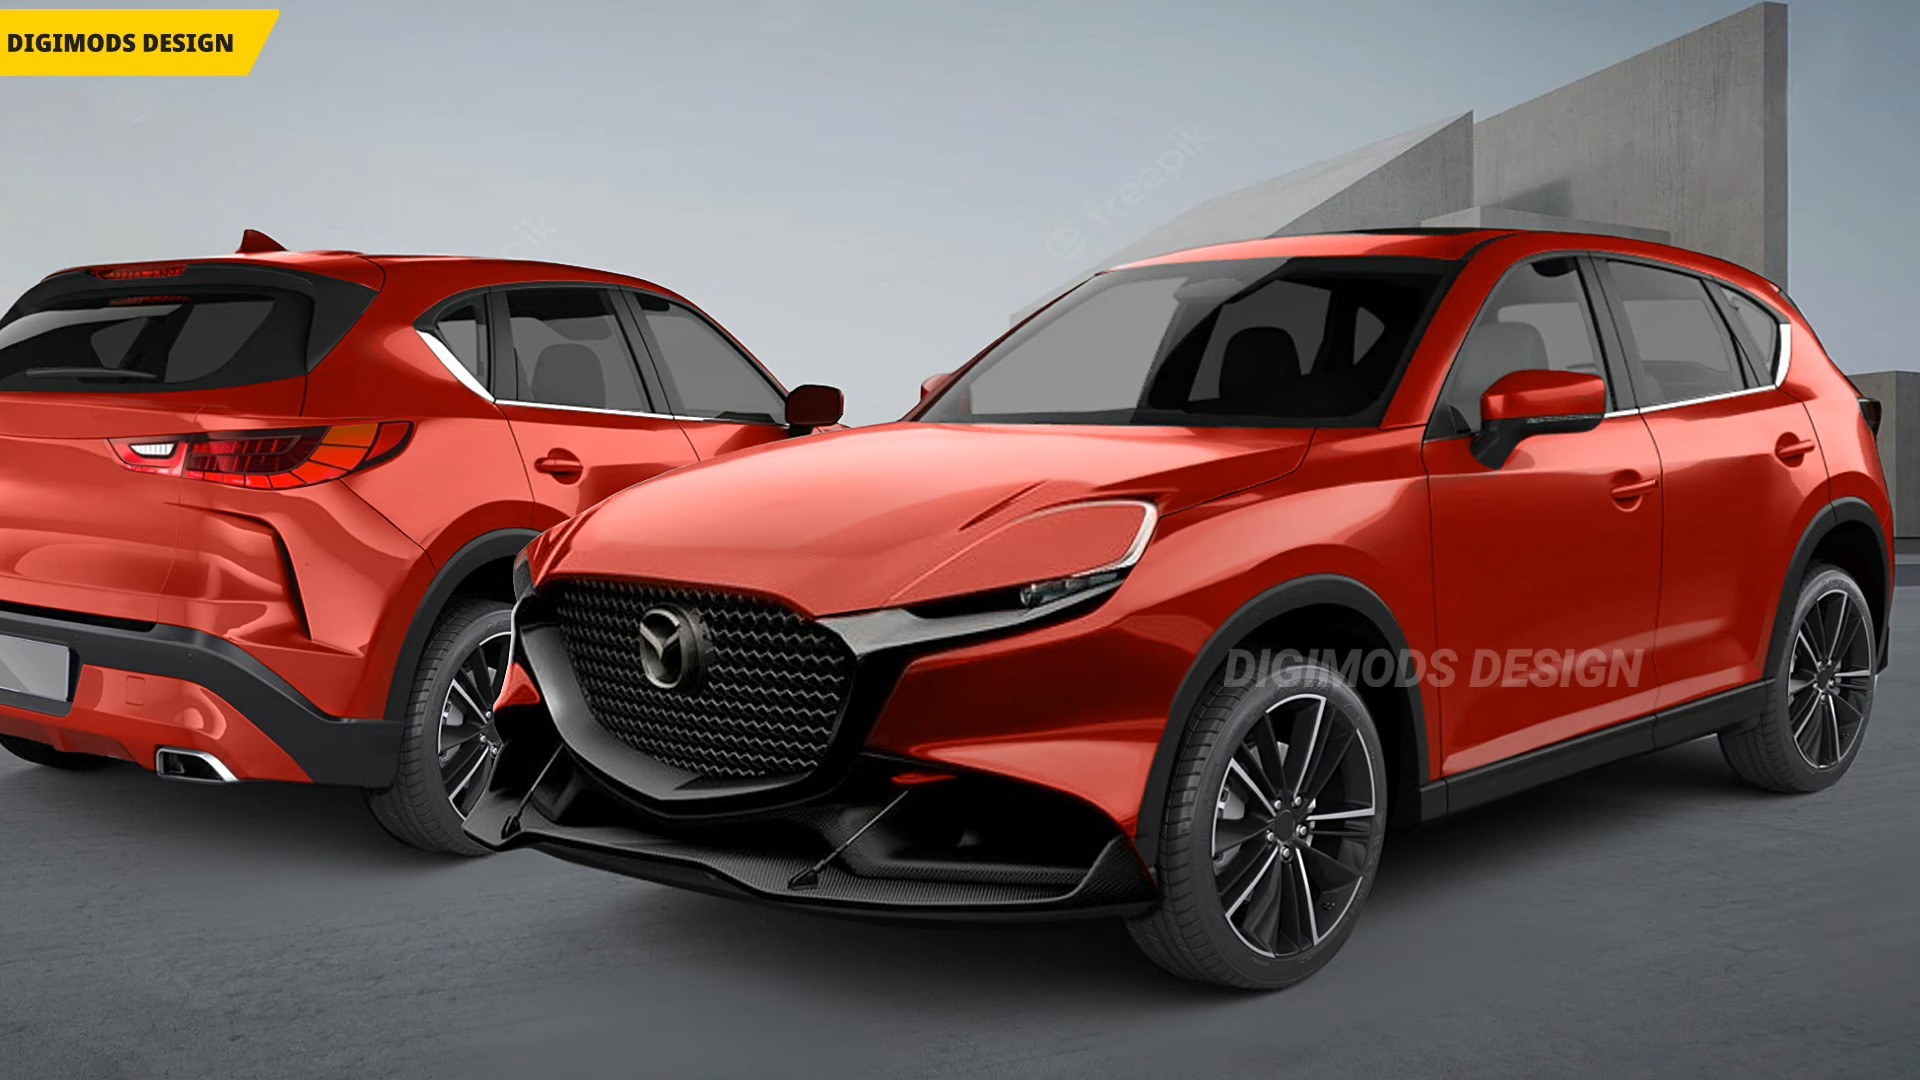 https://s1.cdn.autoevolution.com/images/news/gallery/third-gen-of-best-selling-mazda-cx-5-unofficially-revealed-with-mazdaspeed-cues_7.jpg